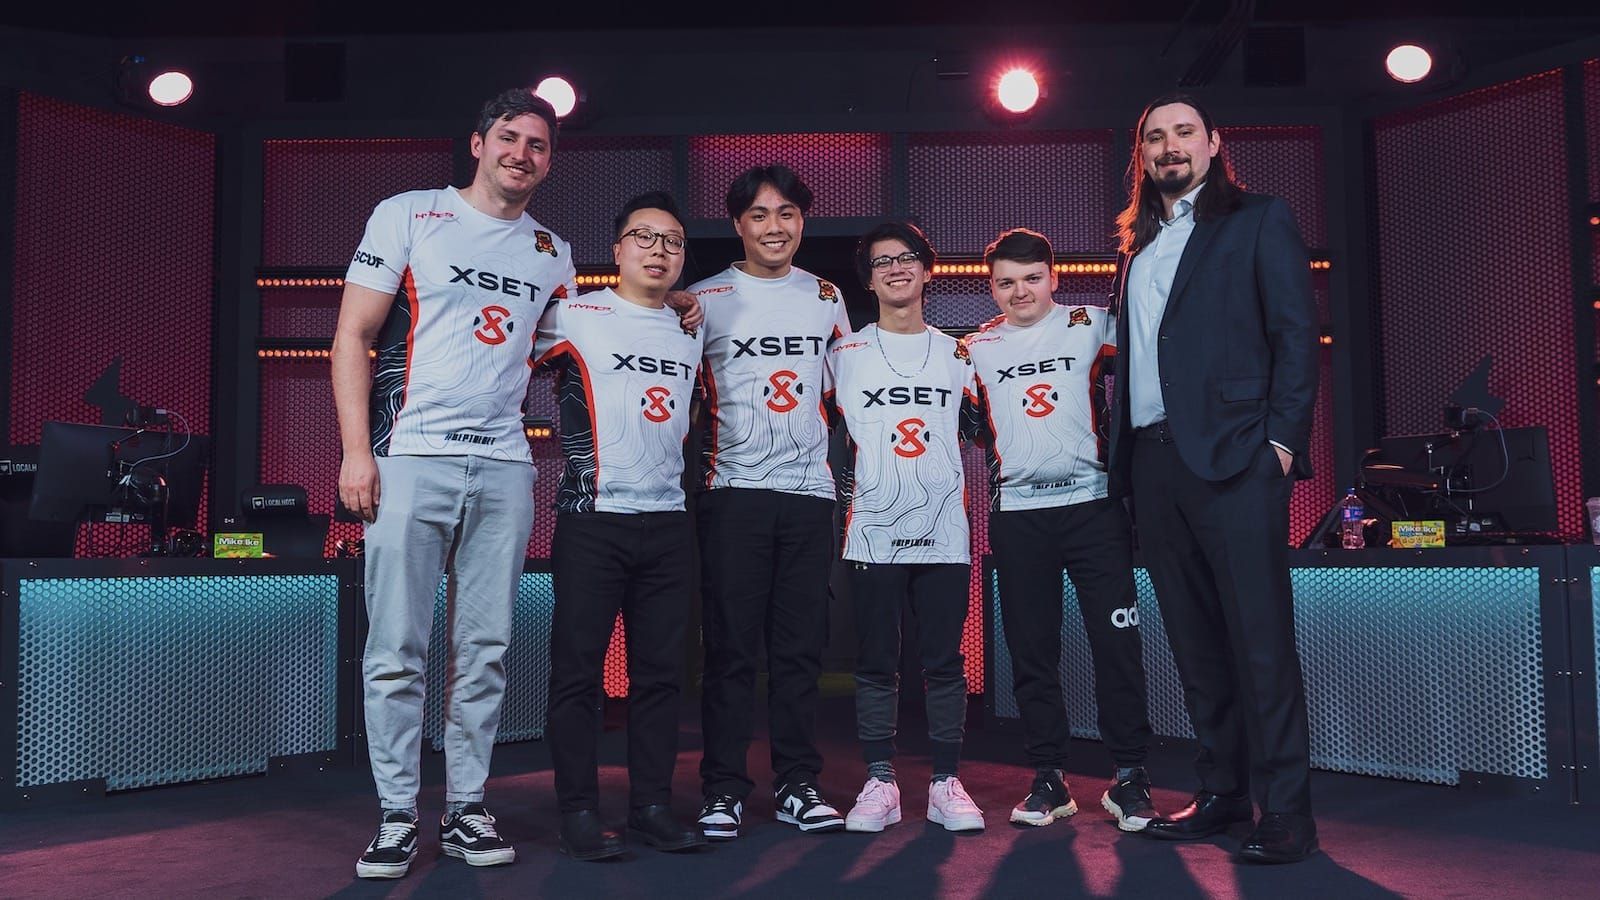 XSET Valorant team pose for a photo onstage after a victory